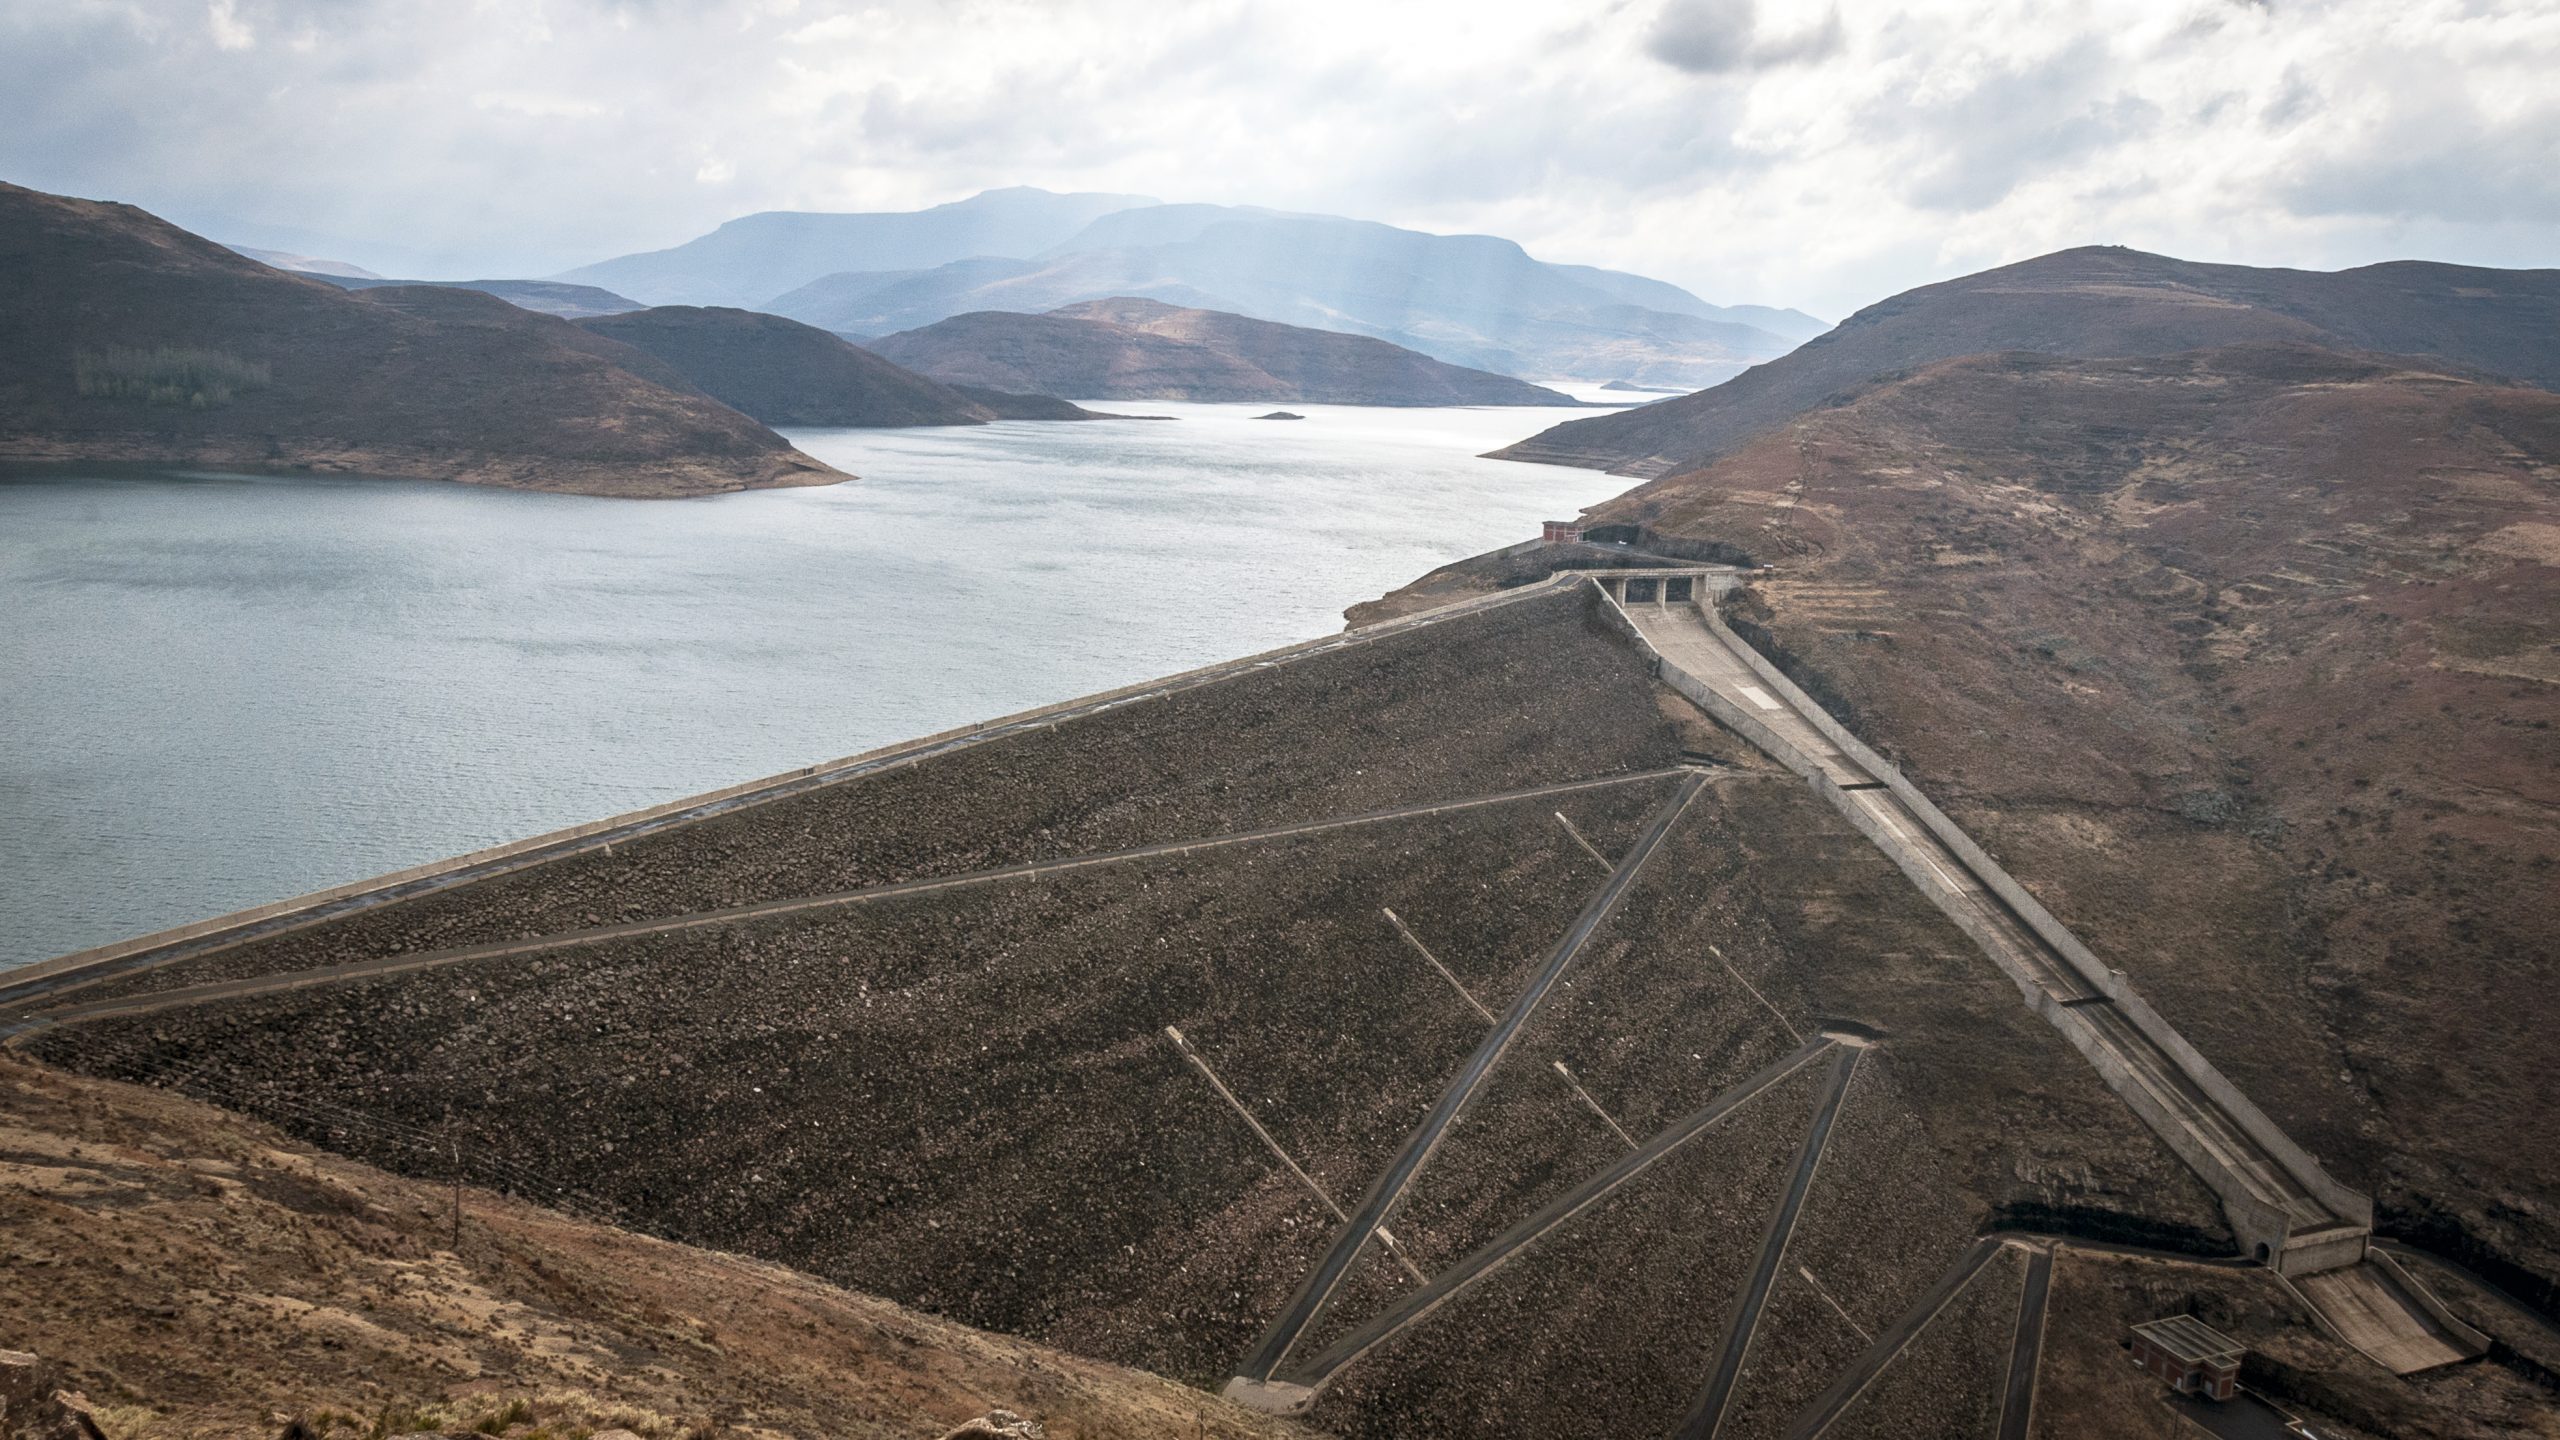 The dam supplies water to South Africa and generates electricity for Lesotho. 